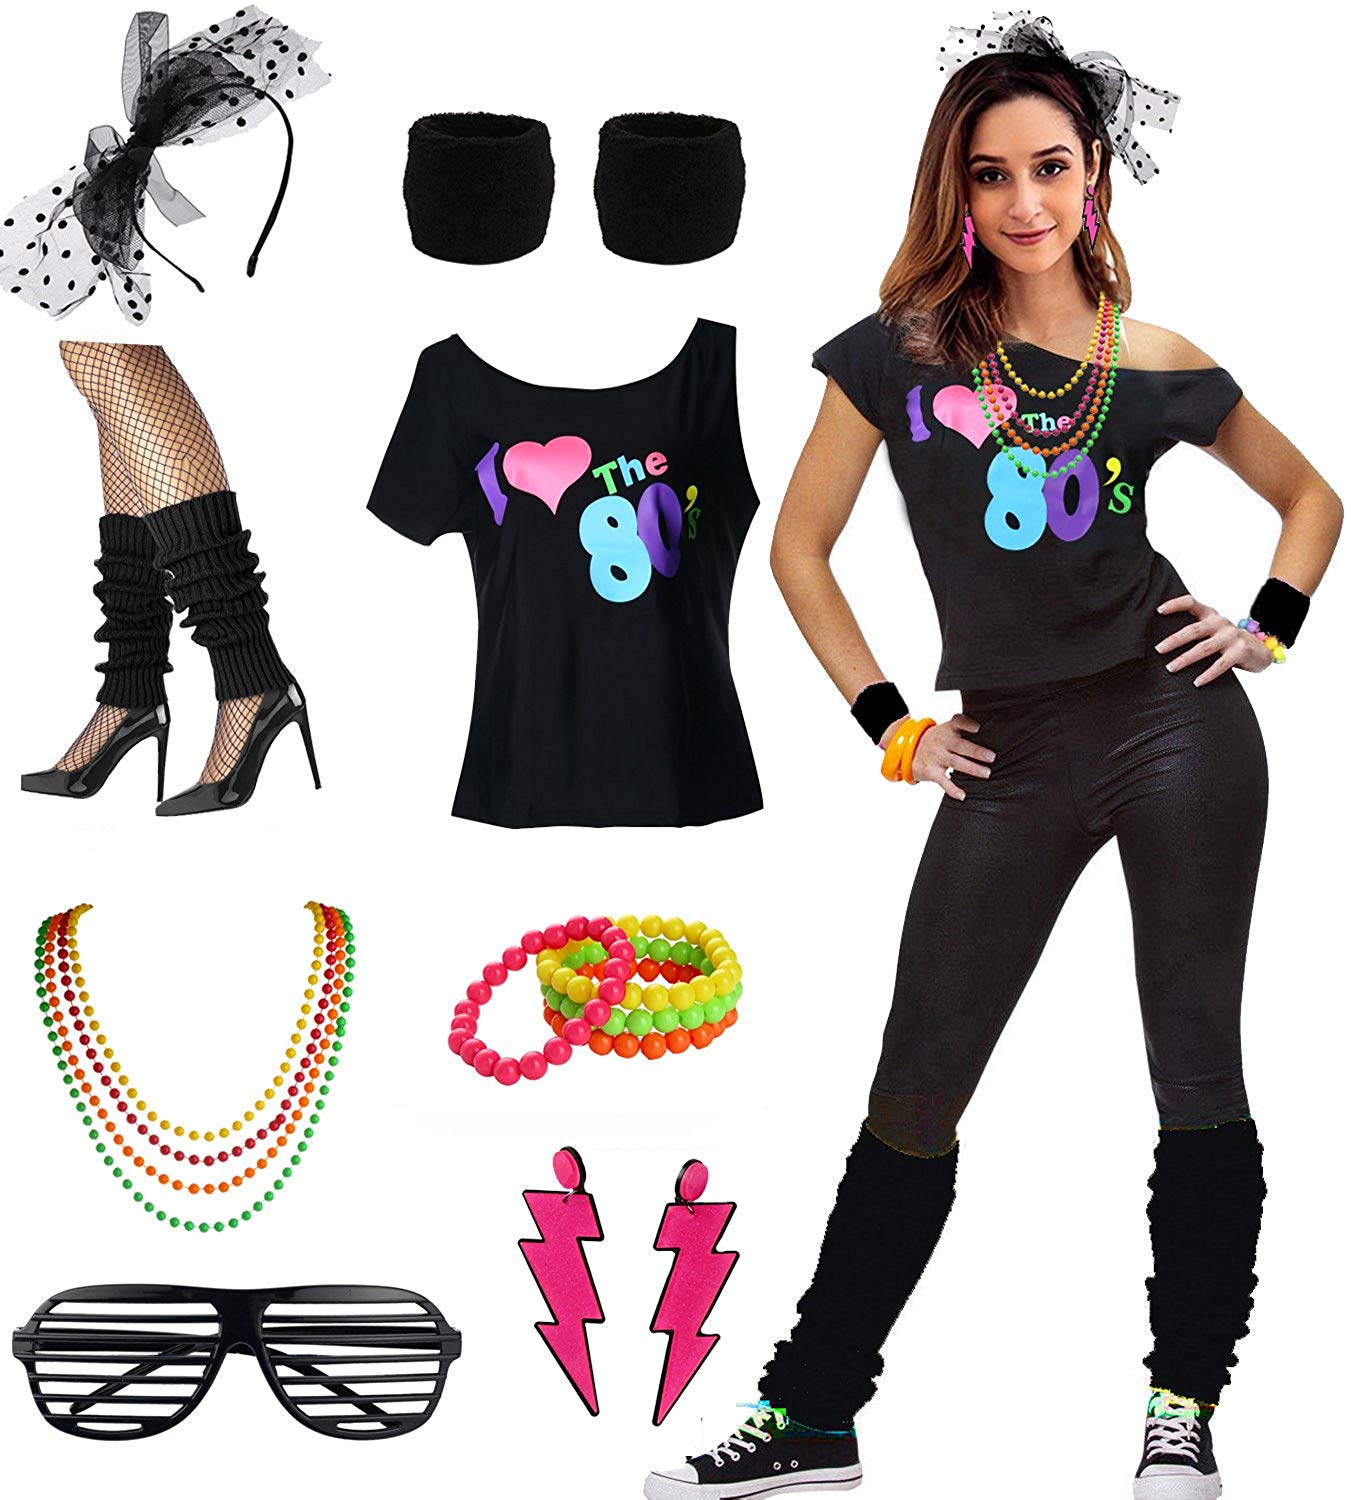 80s Fashion and Apparel Logo - Womens I Love The 80's Disco 80s Costume Outfit